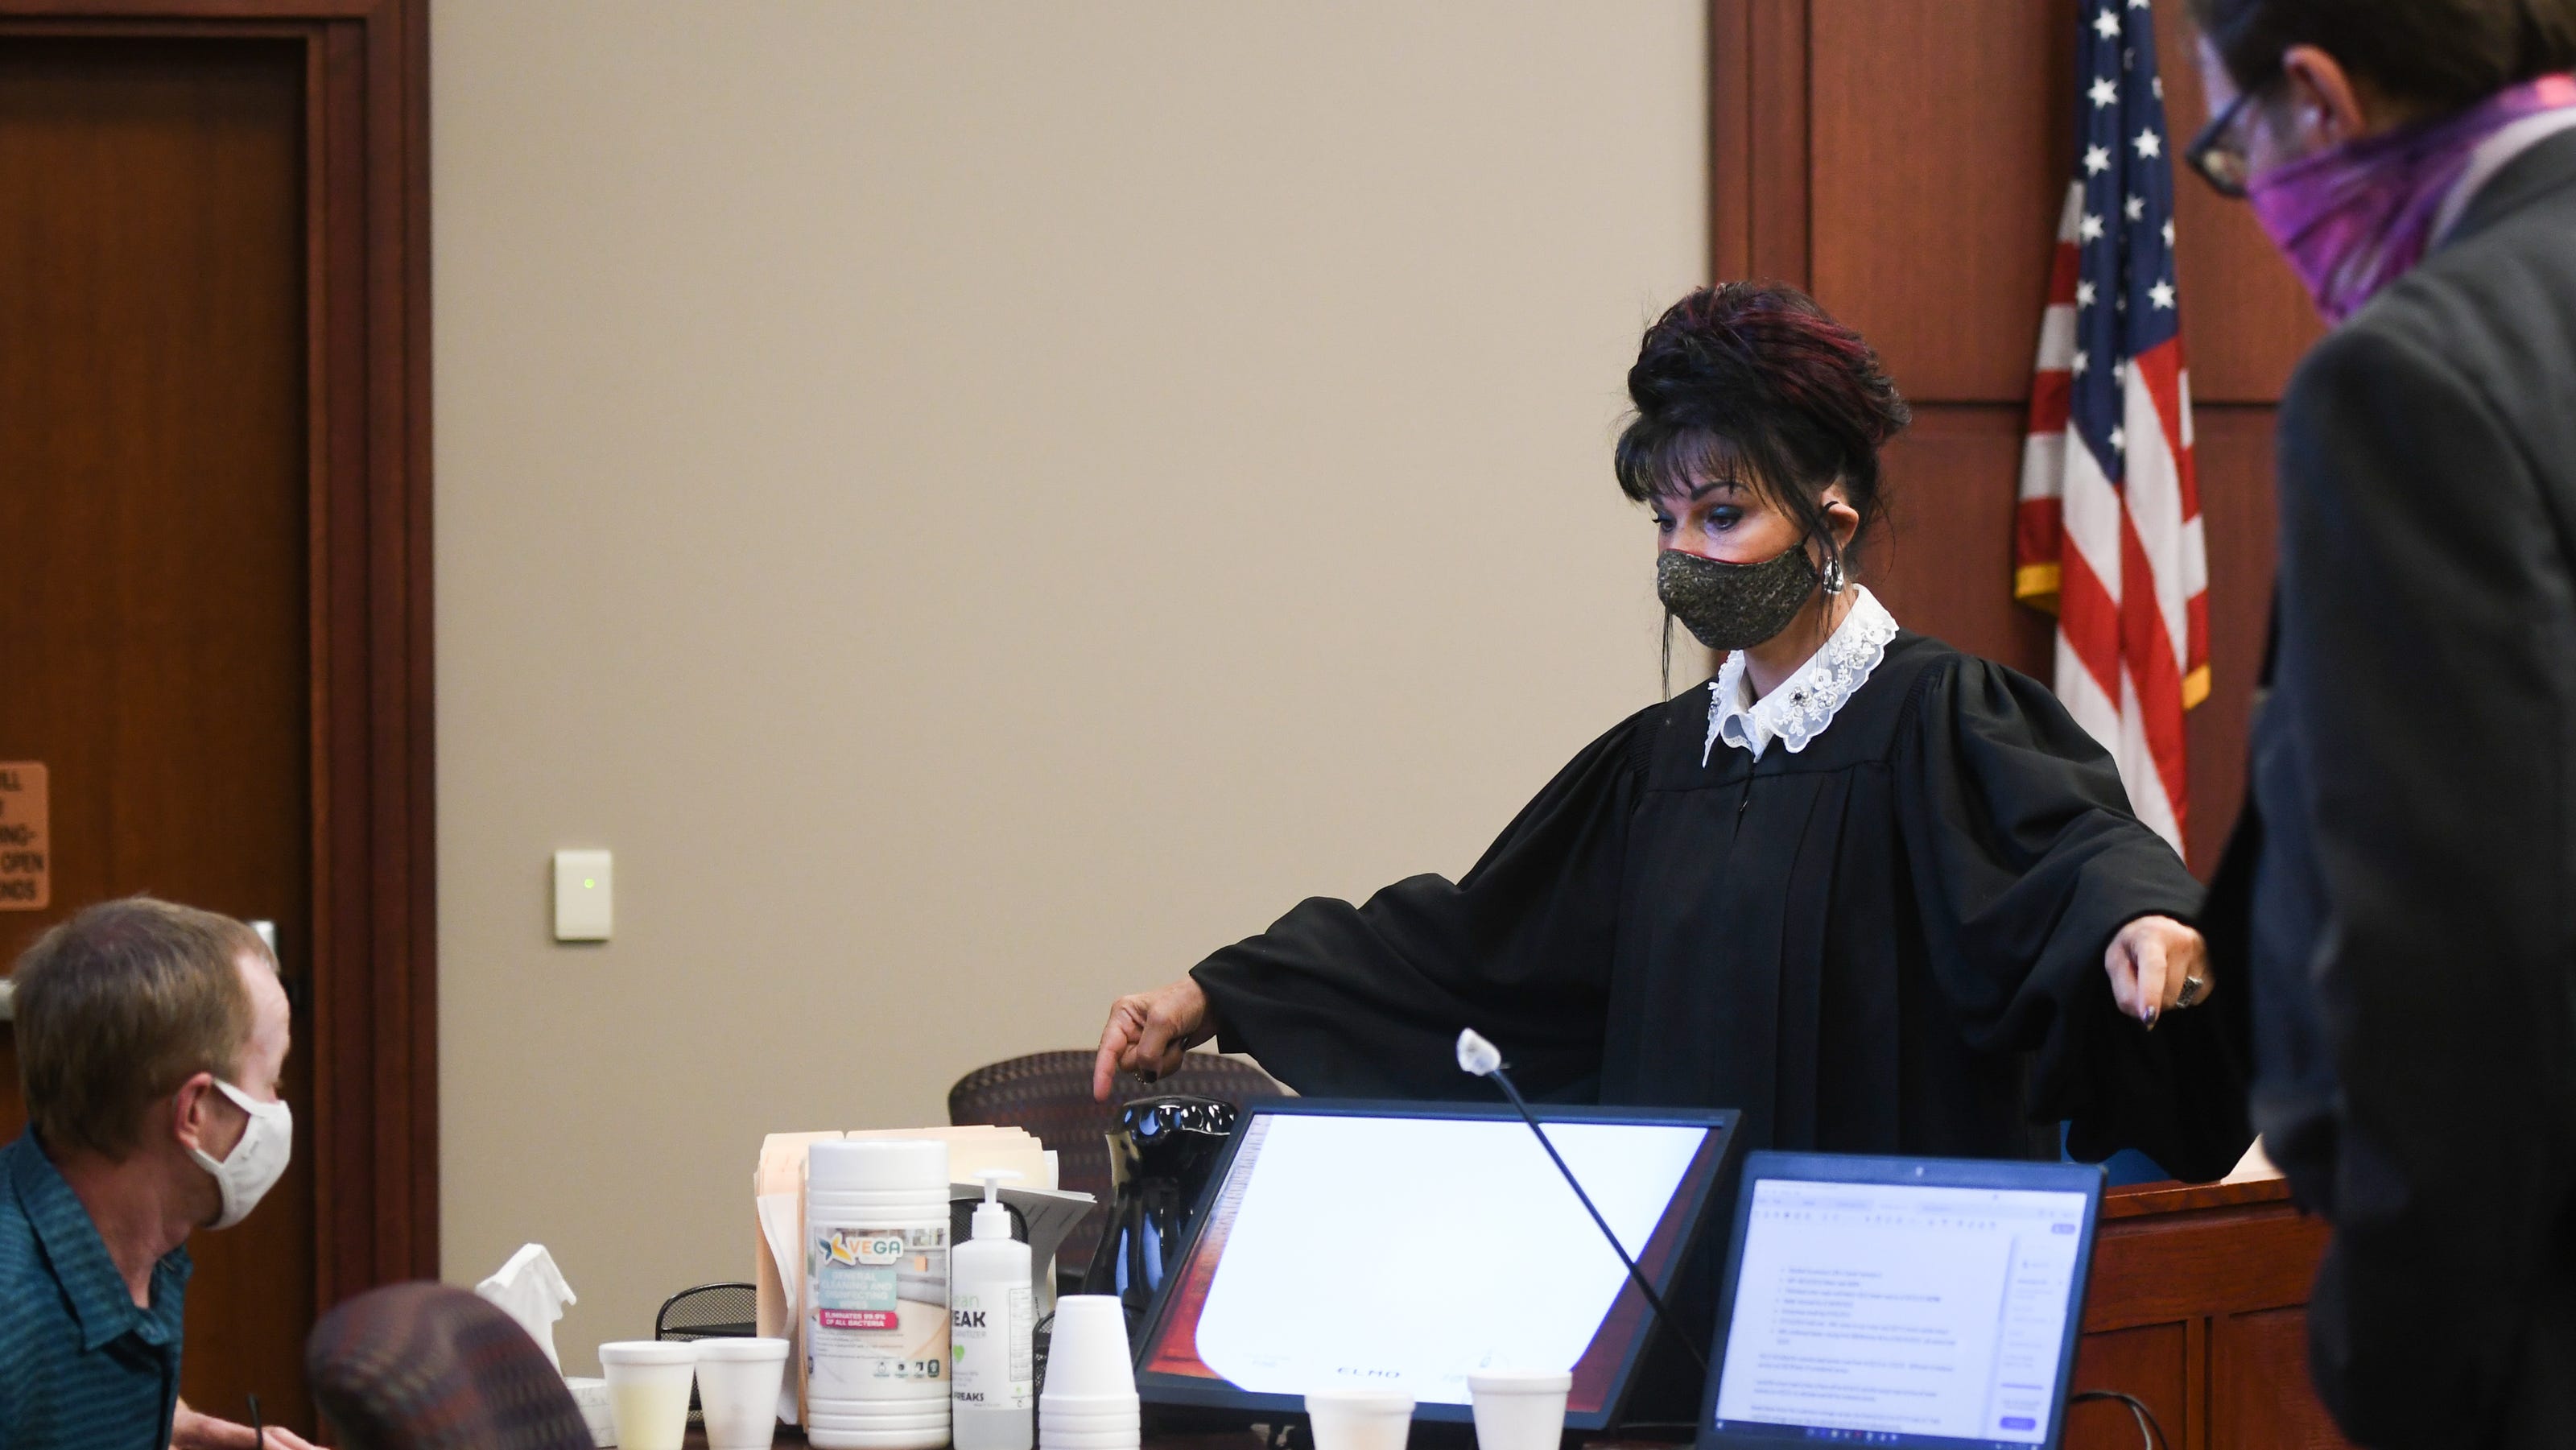 Ingham County holds first jury trial since COVID 19 pandemic began